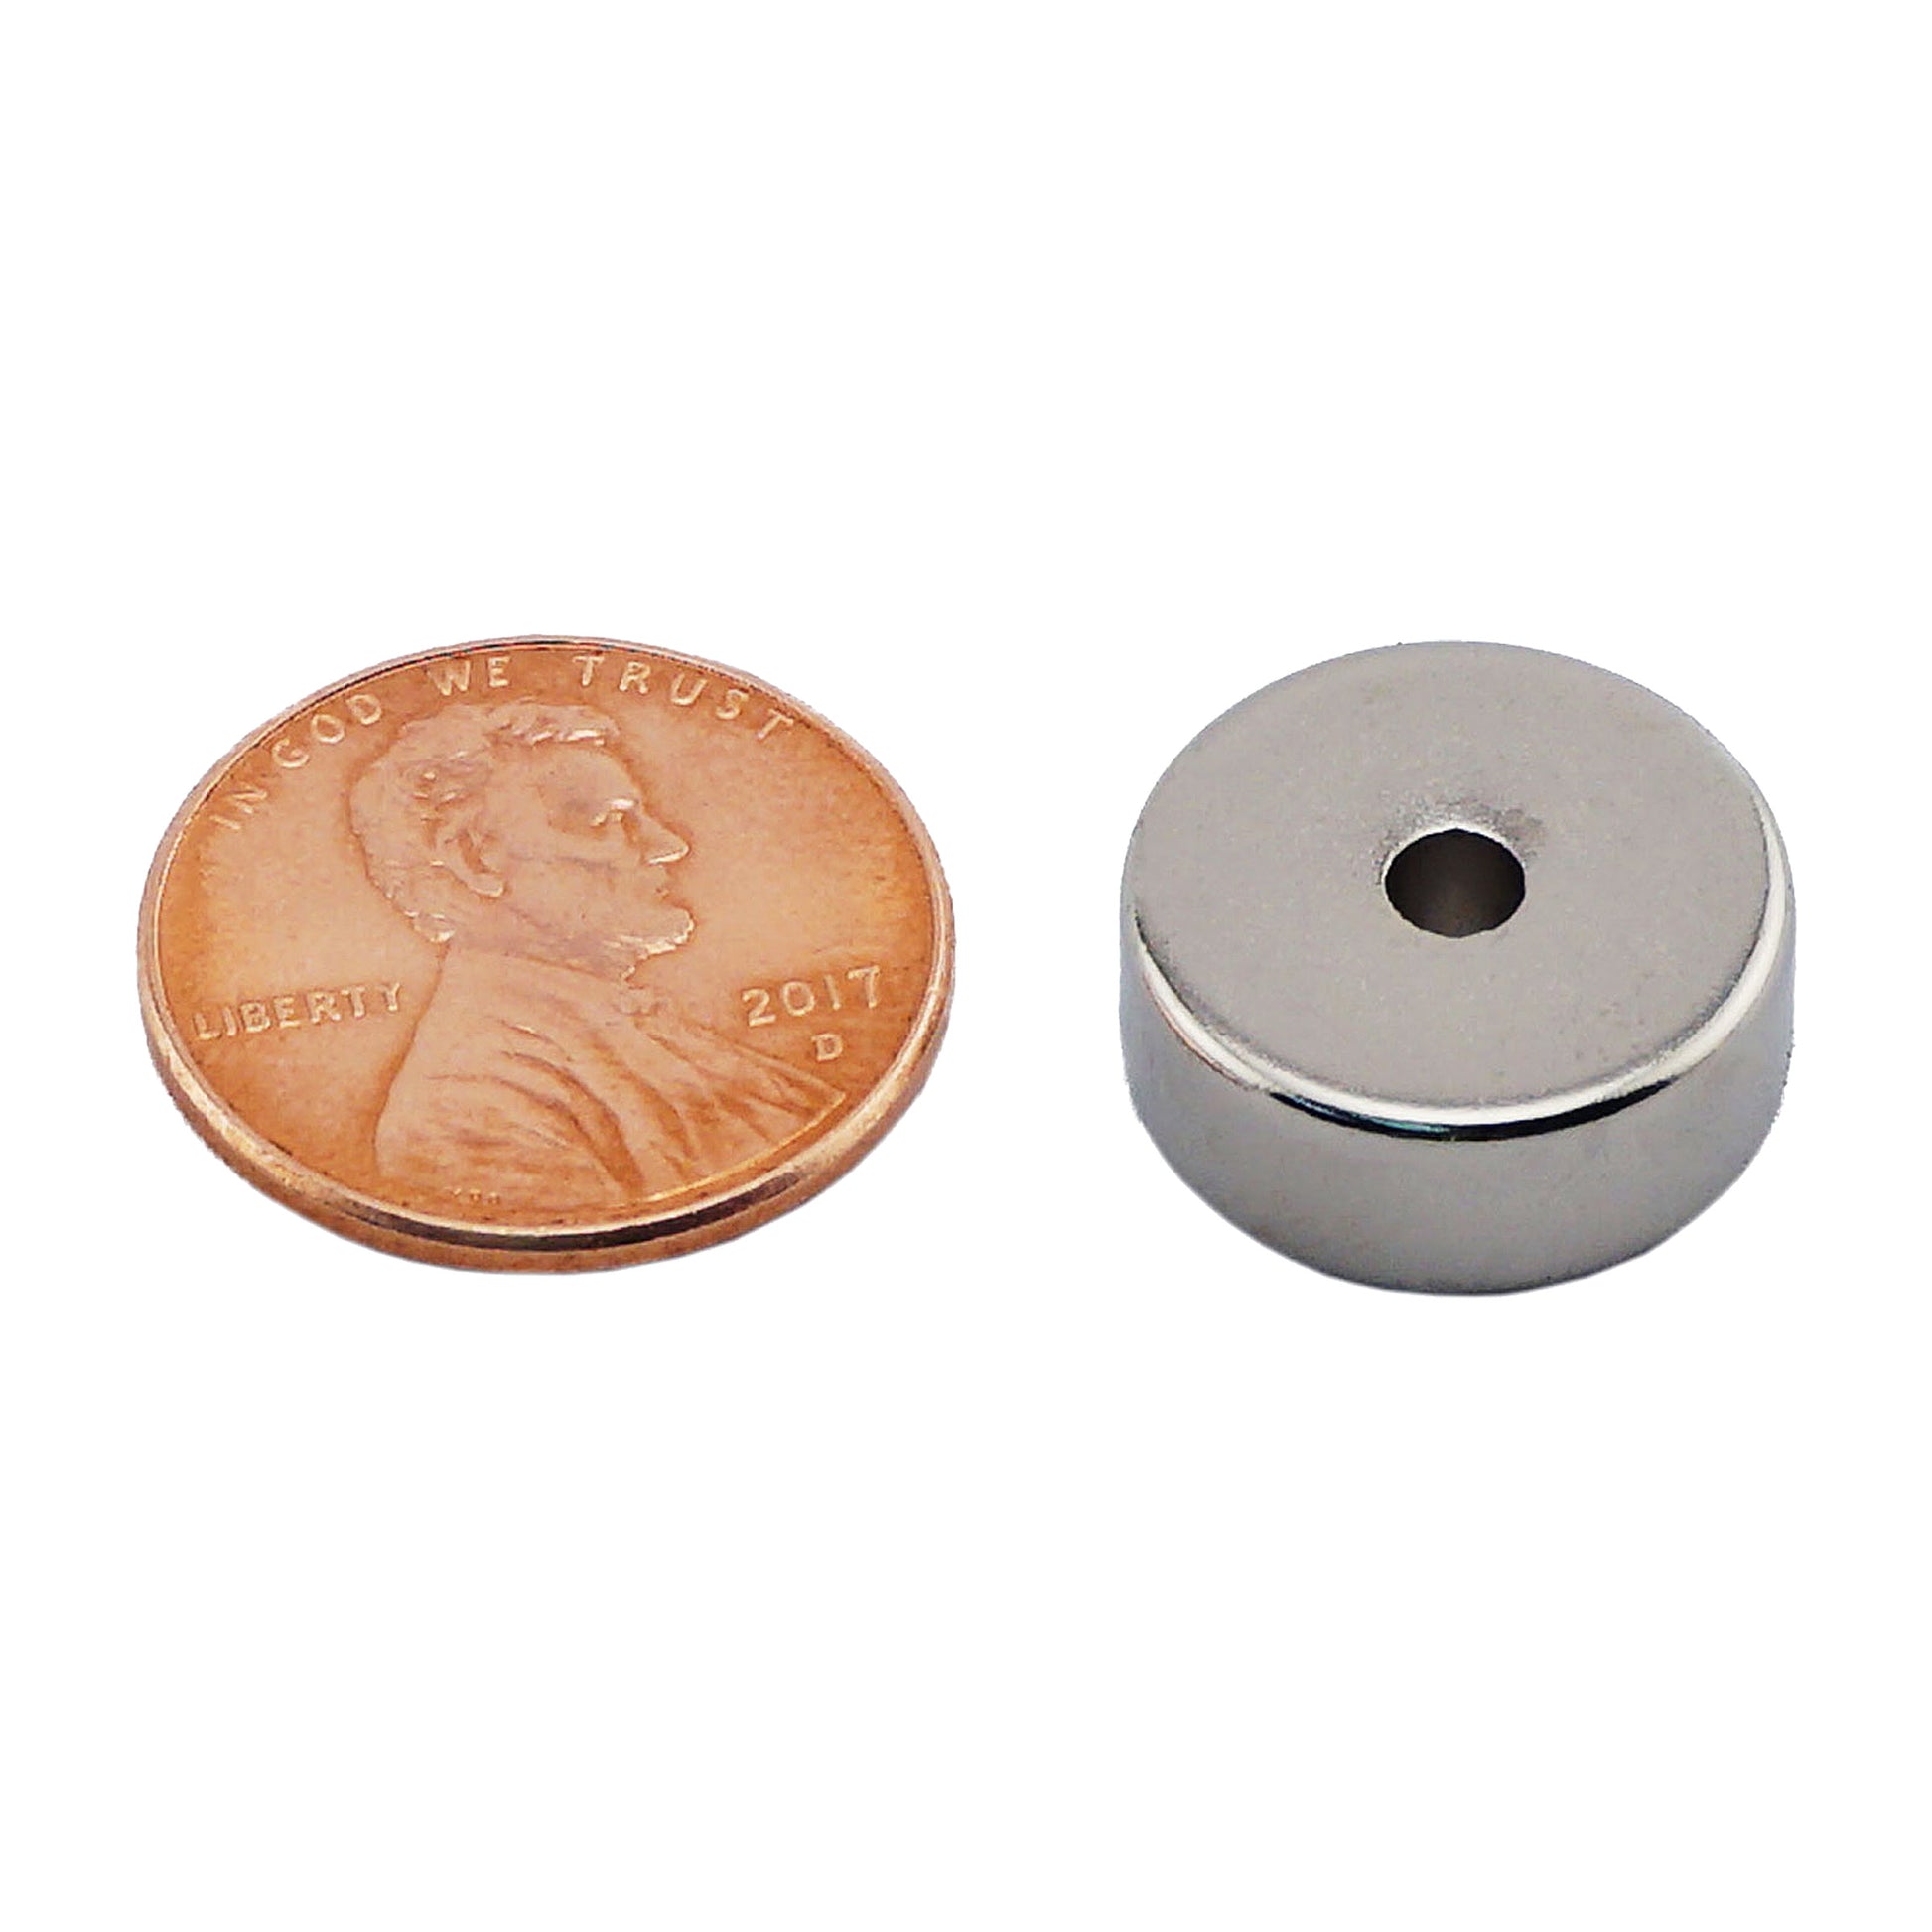 Load image into Gallery viewer, NR006204N Neodymium Ring Magnet - Compared to Penny for Size Reference